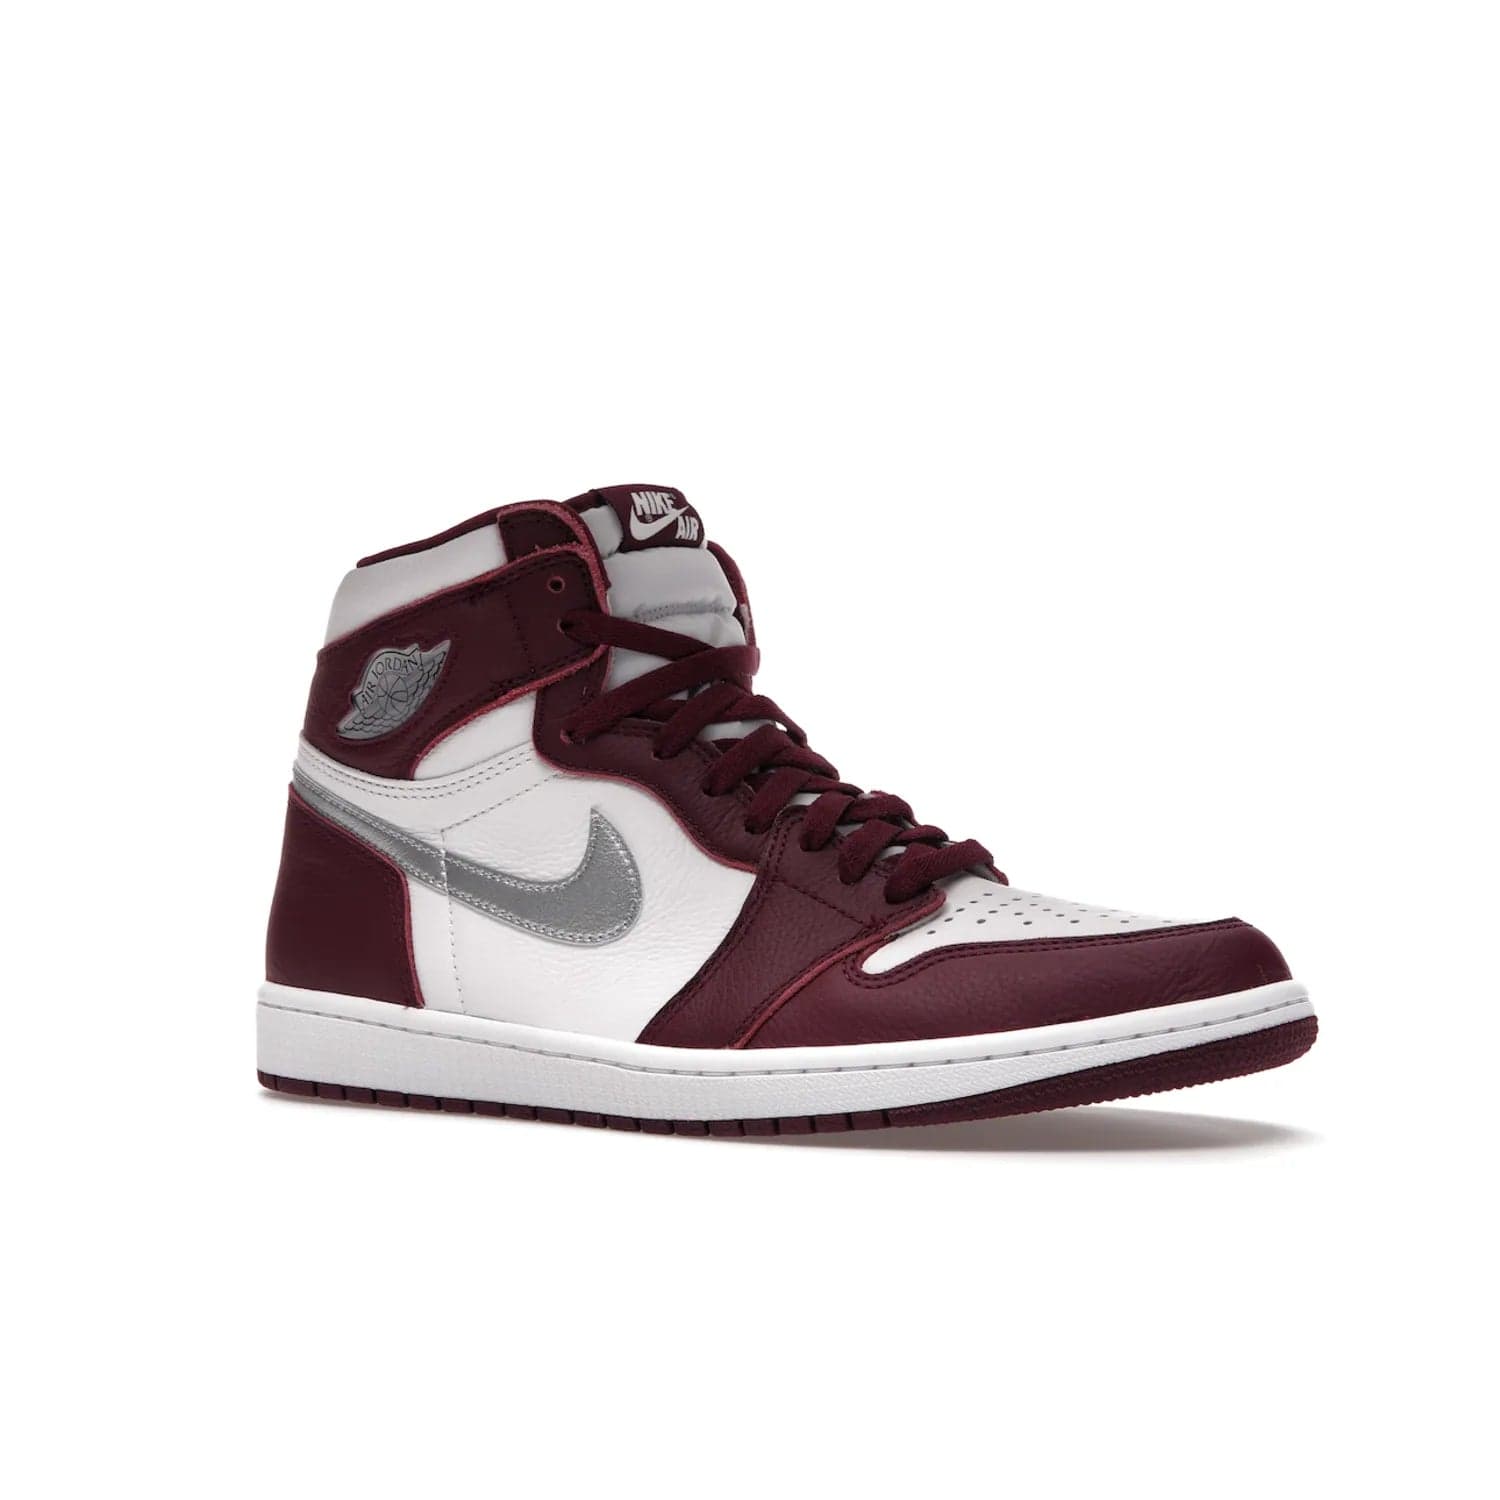 Jordan 1 Retro High OG Bordeaux - Image 4 - Only at www.BallersClubKickz.com - Shop the classic Air Jordan 1 High Bordeaux with a modern high-top cut. The timeless Bordeaux and White-Metallic Silver colorway, releasing Nov 20, 2021, is perfect for practice or a night out.